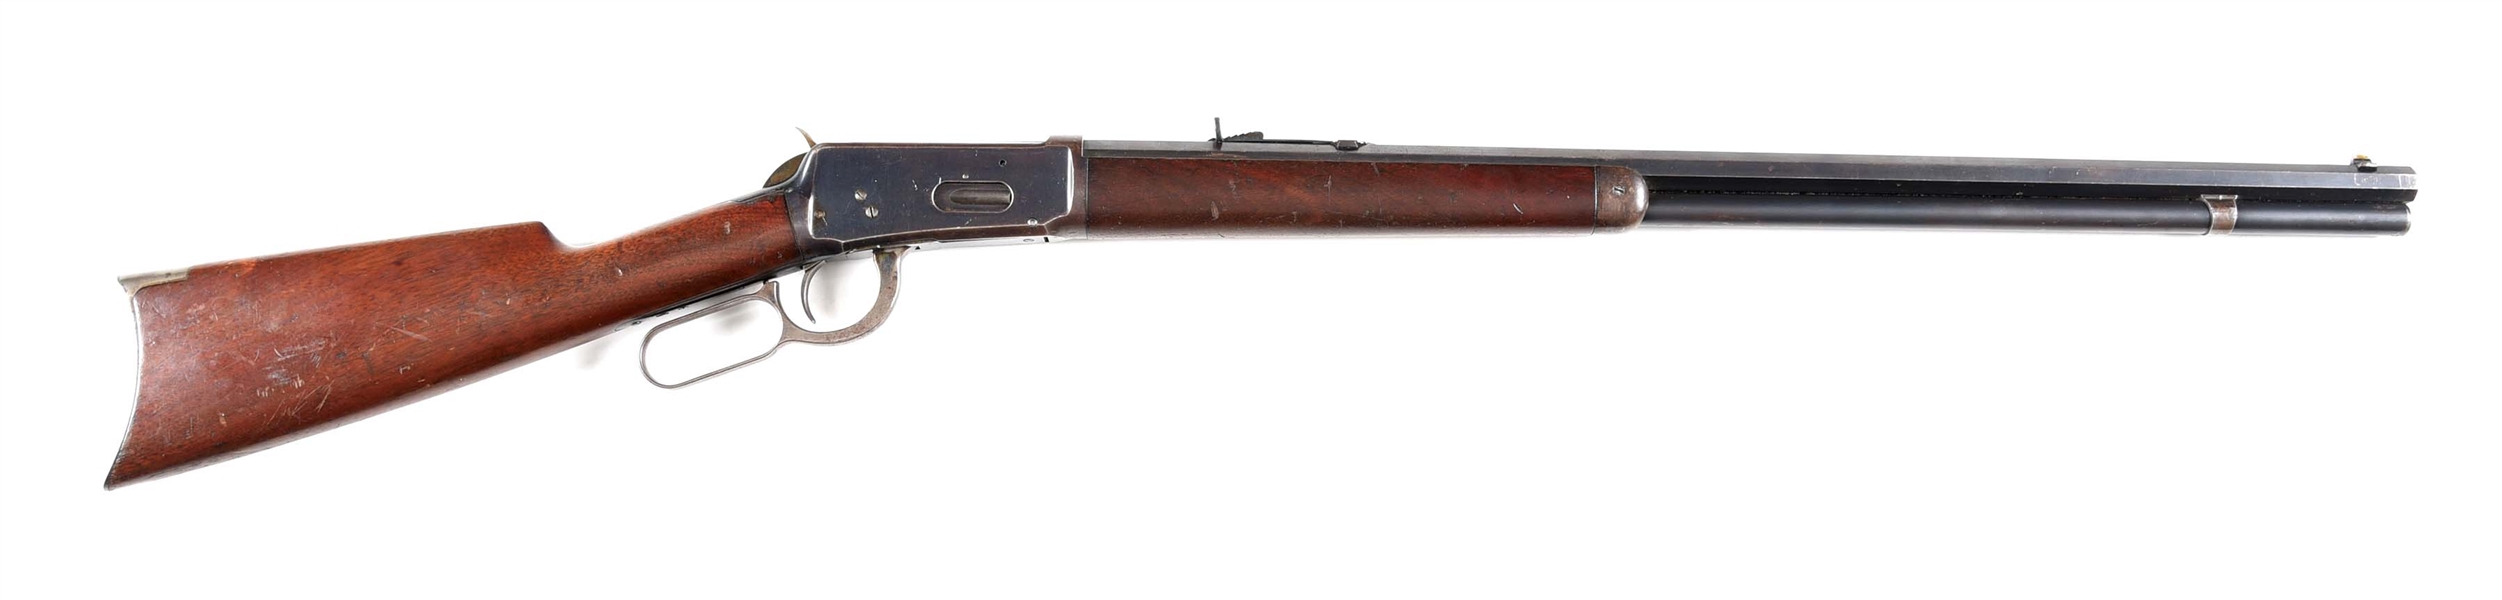 (A) FIRST YEAR  PRODUCTION WINCHESTER MODEL 1894 LEVER ACTION RRIFLE (1894).